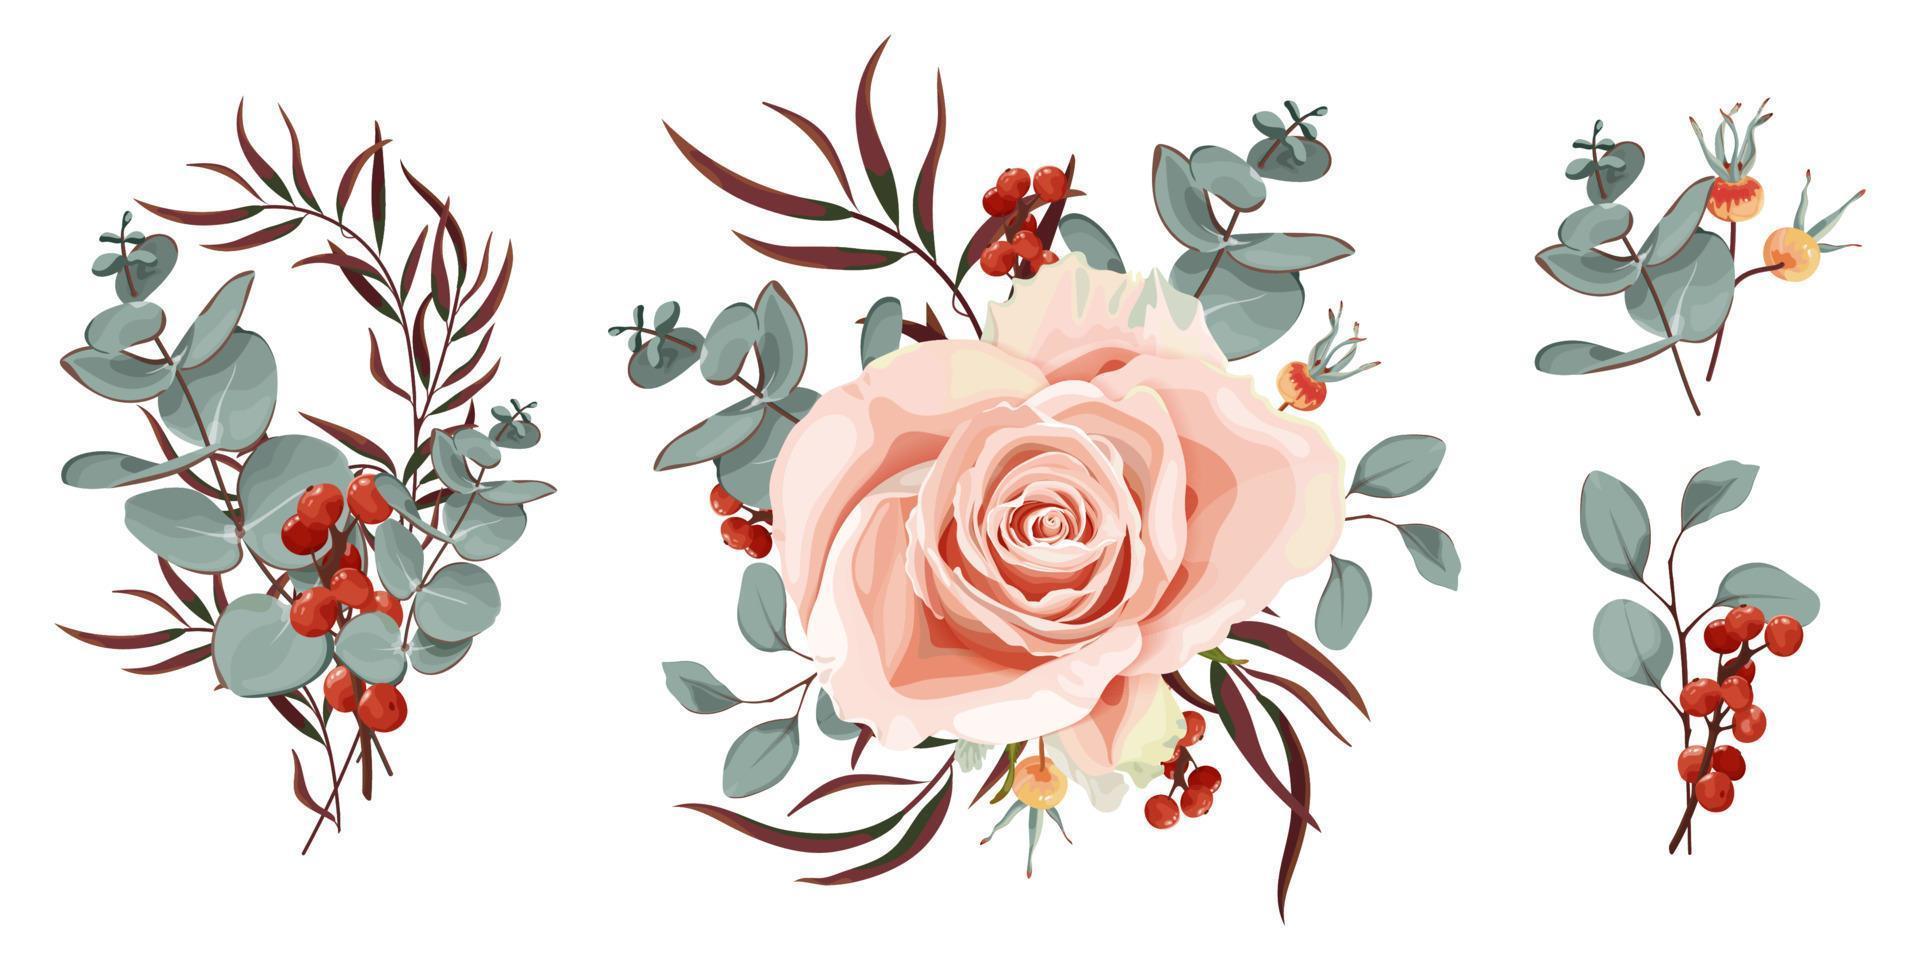 Set of vector floral bouquets. Powdery rose, eucalyptus, branch of red berries and rose hips. Wedding floristics in the style of Boho. Autumn bouquet. Vector stock illustration on white background.